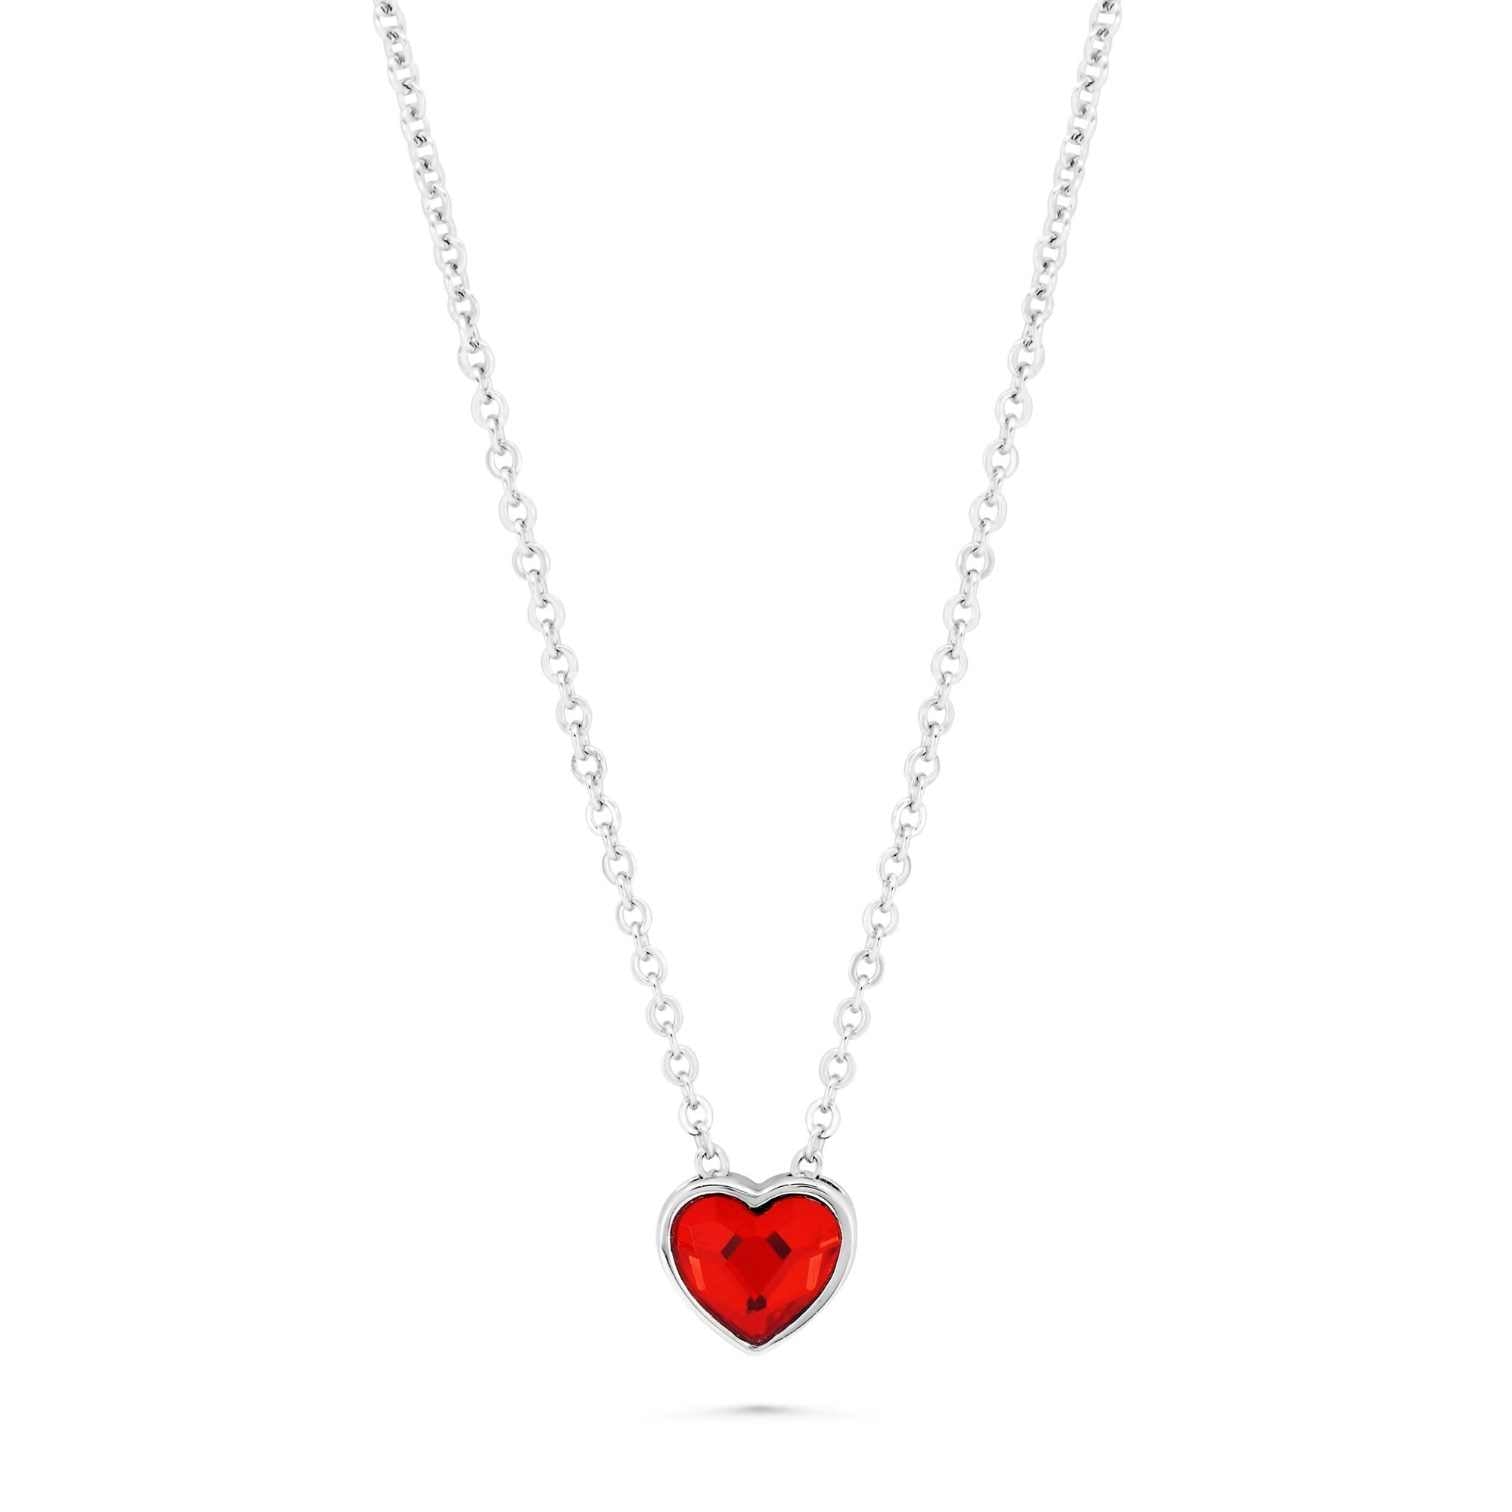 Crystal Heart Necklace Silver Chain Gold Chain Heart Gold 